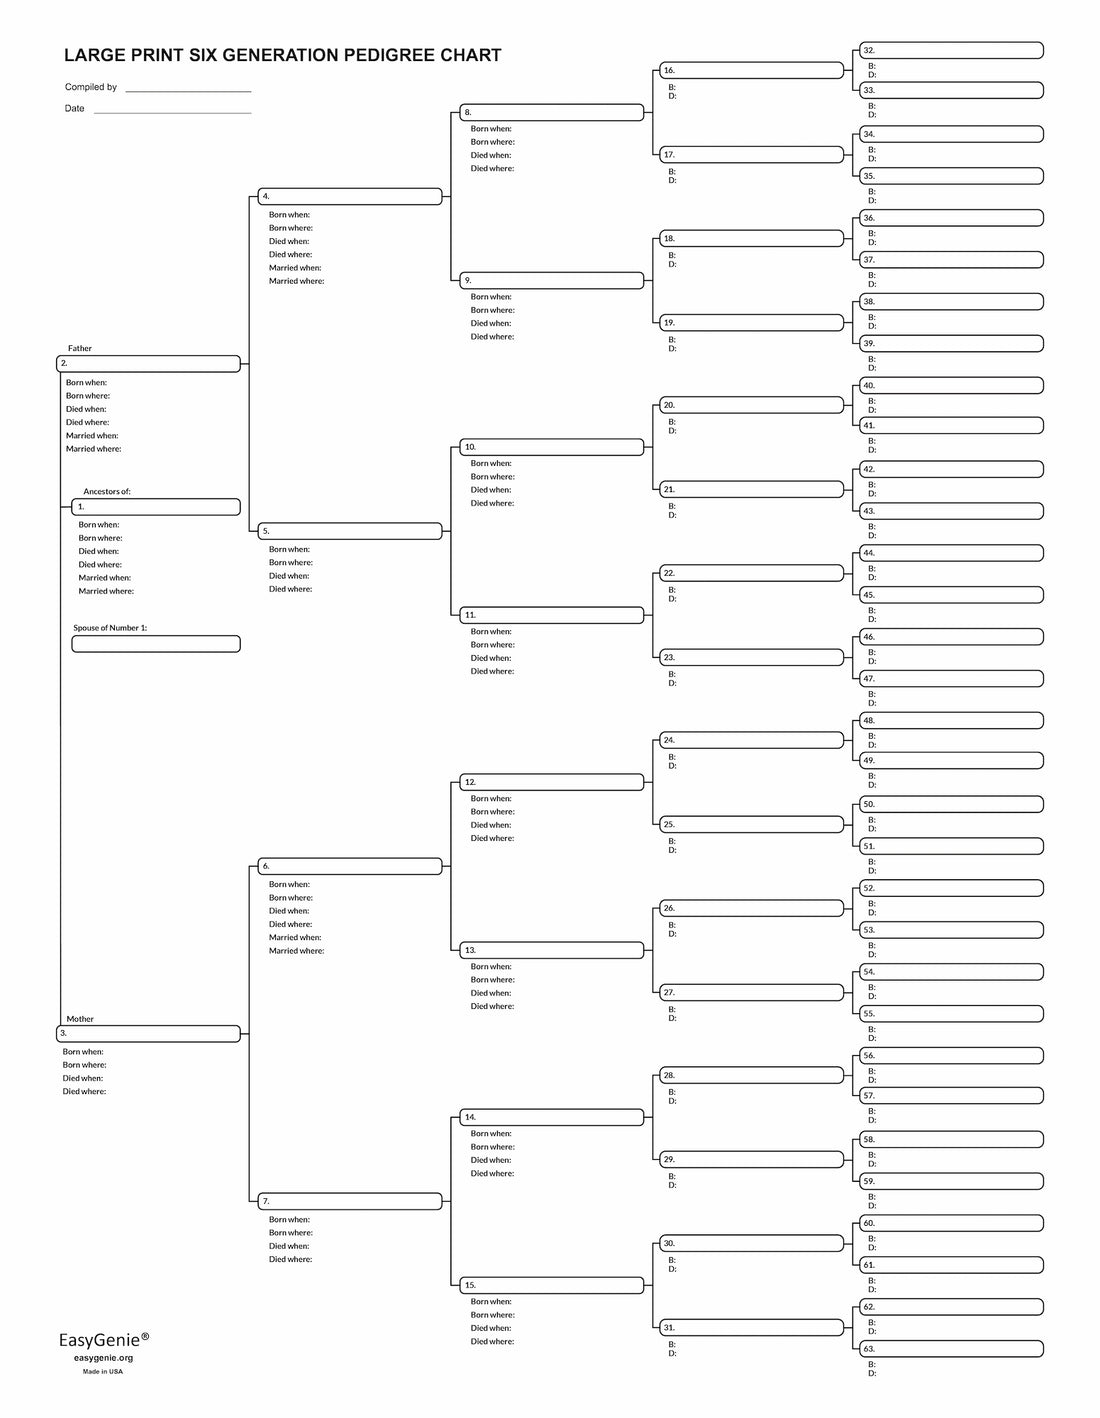 Pedigree charts | 6-generation charts for tracking ancestry (10 LARGE ...